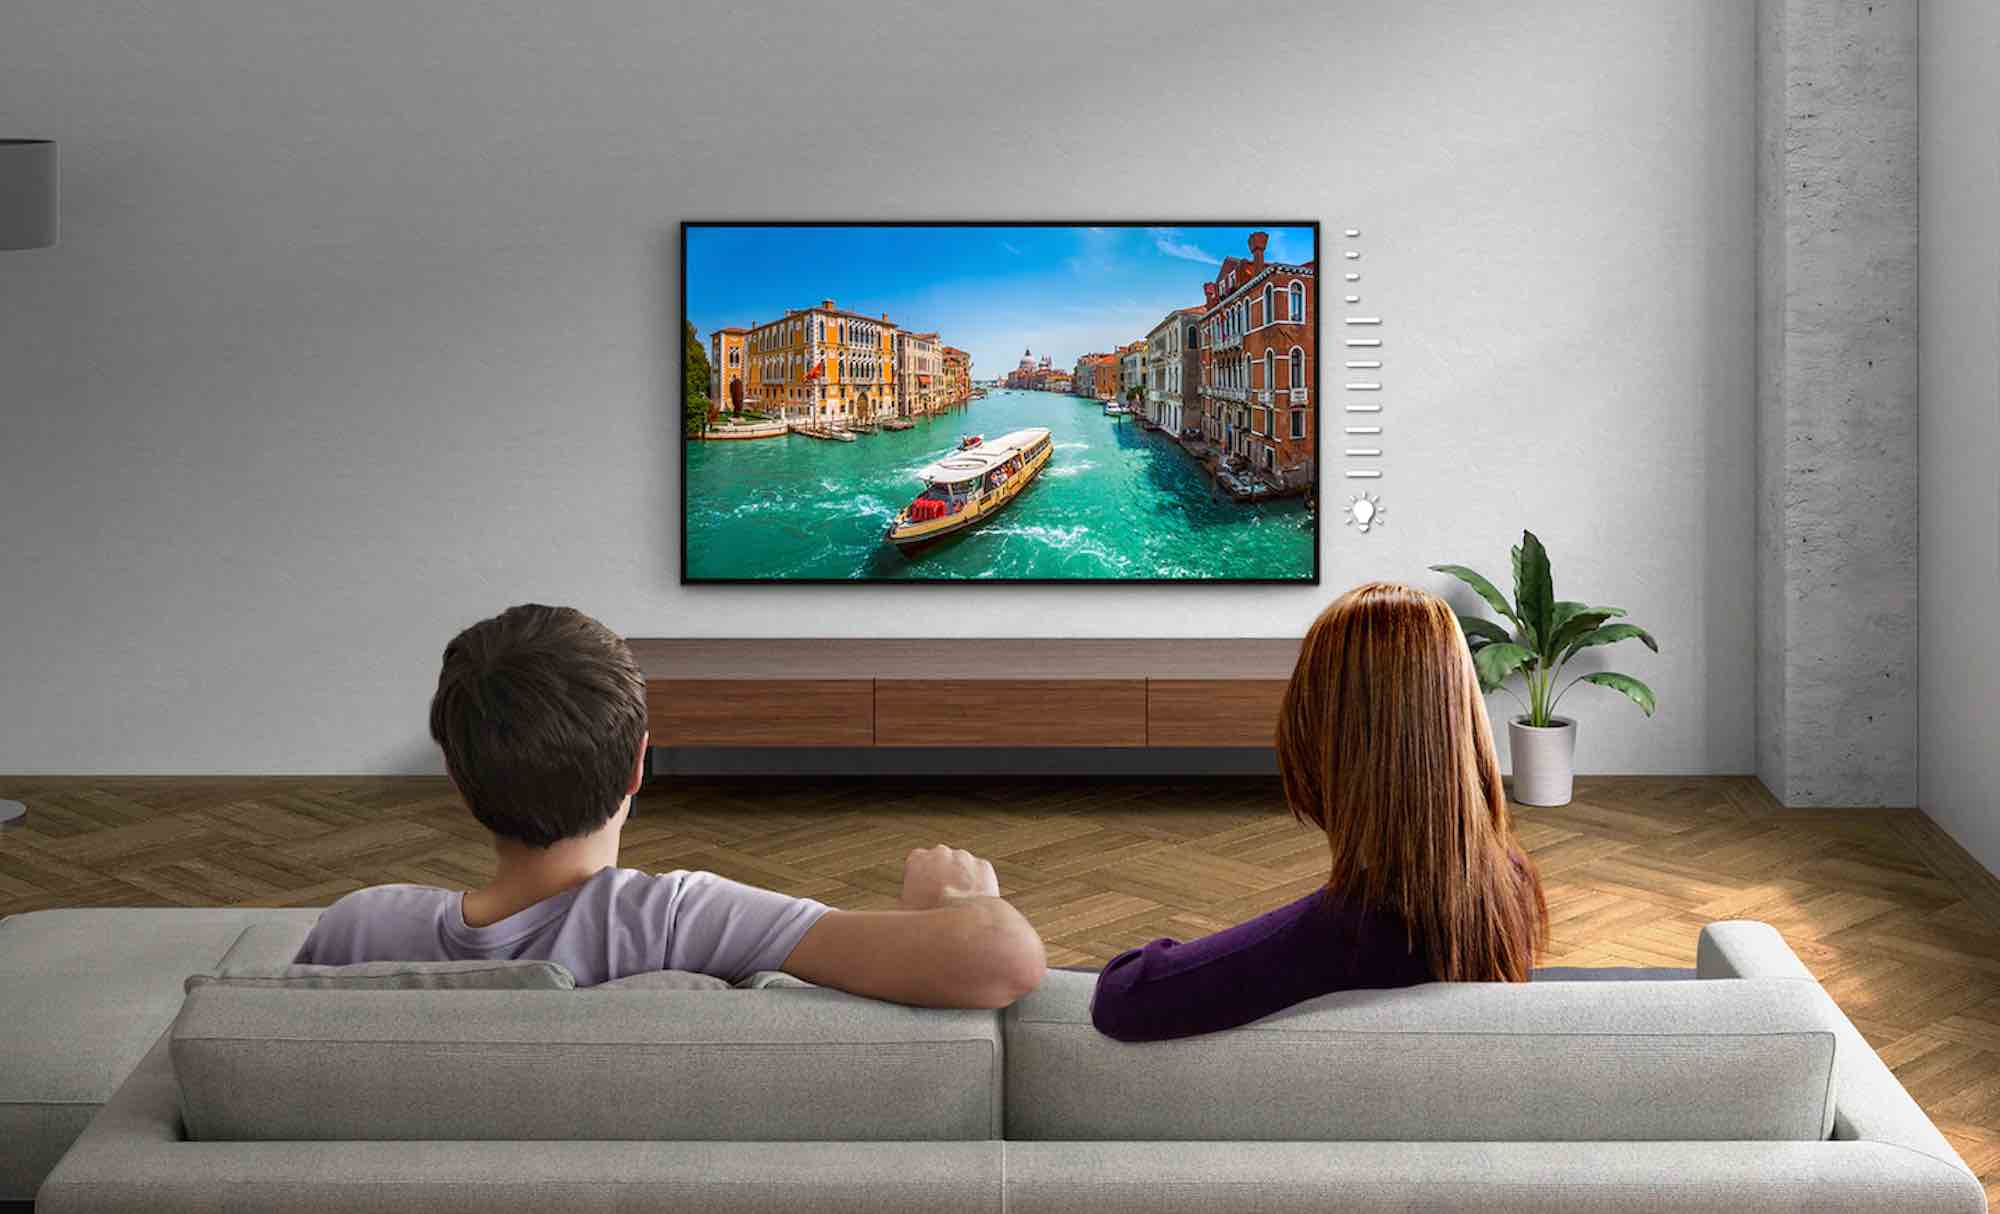 A Basic Guide to Smart TV That You Need to Know